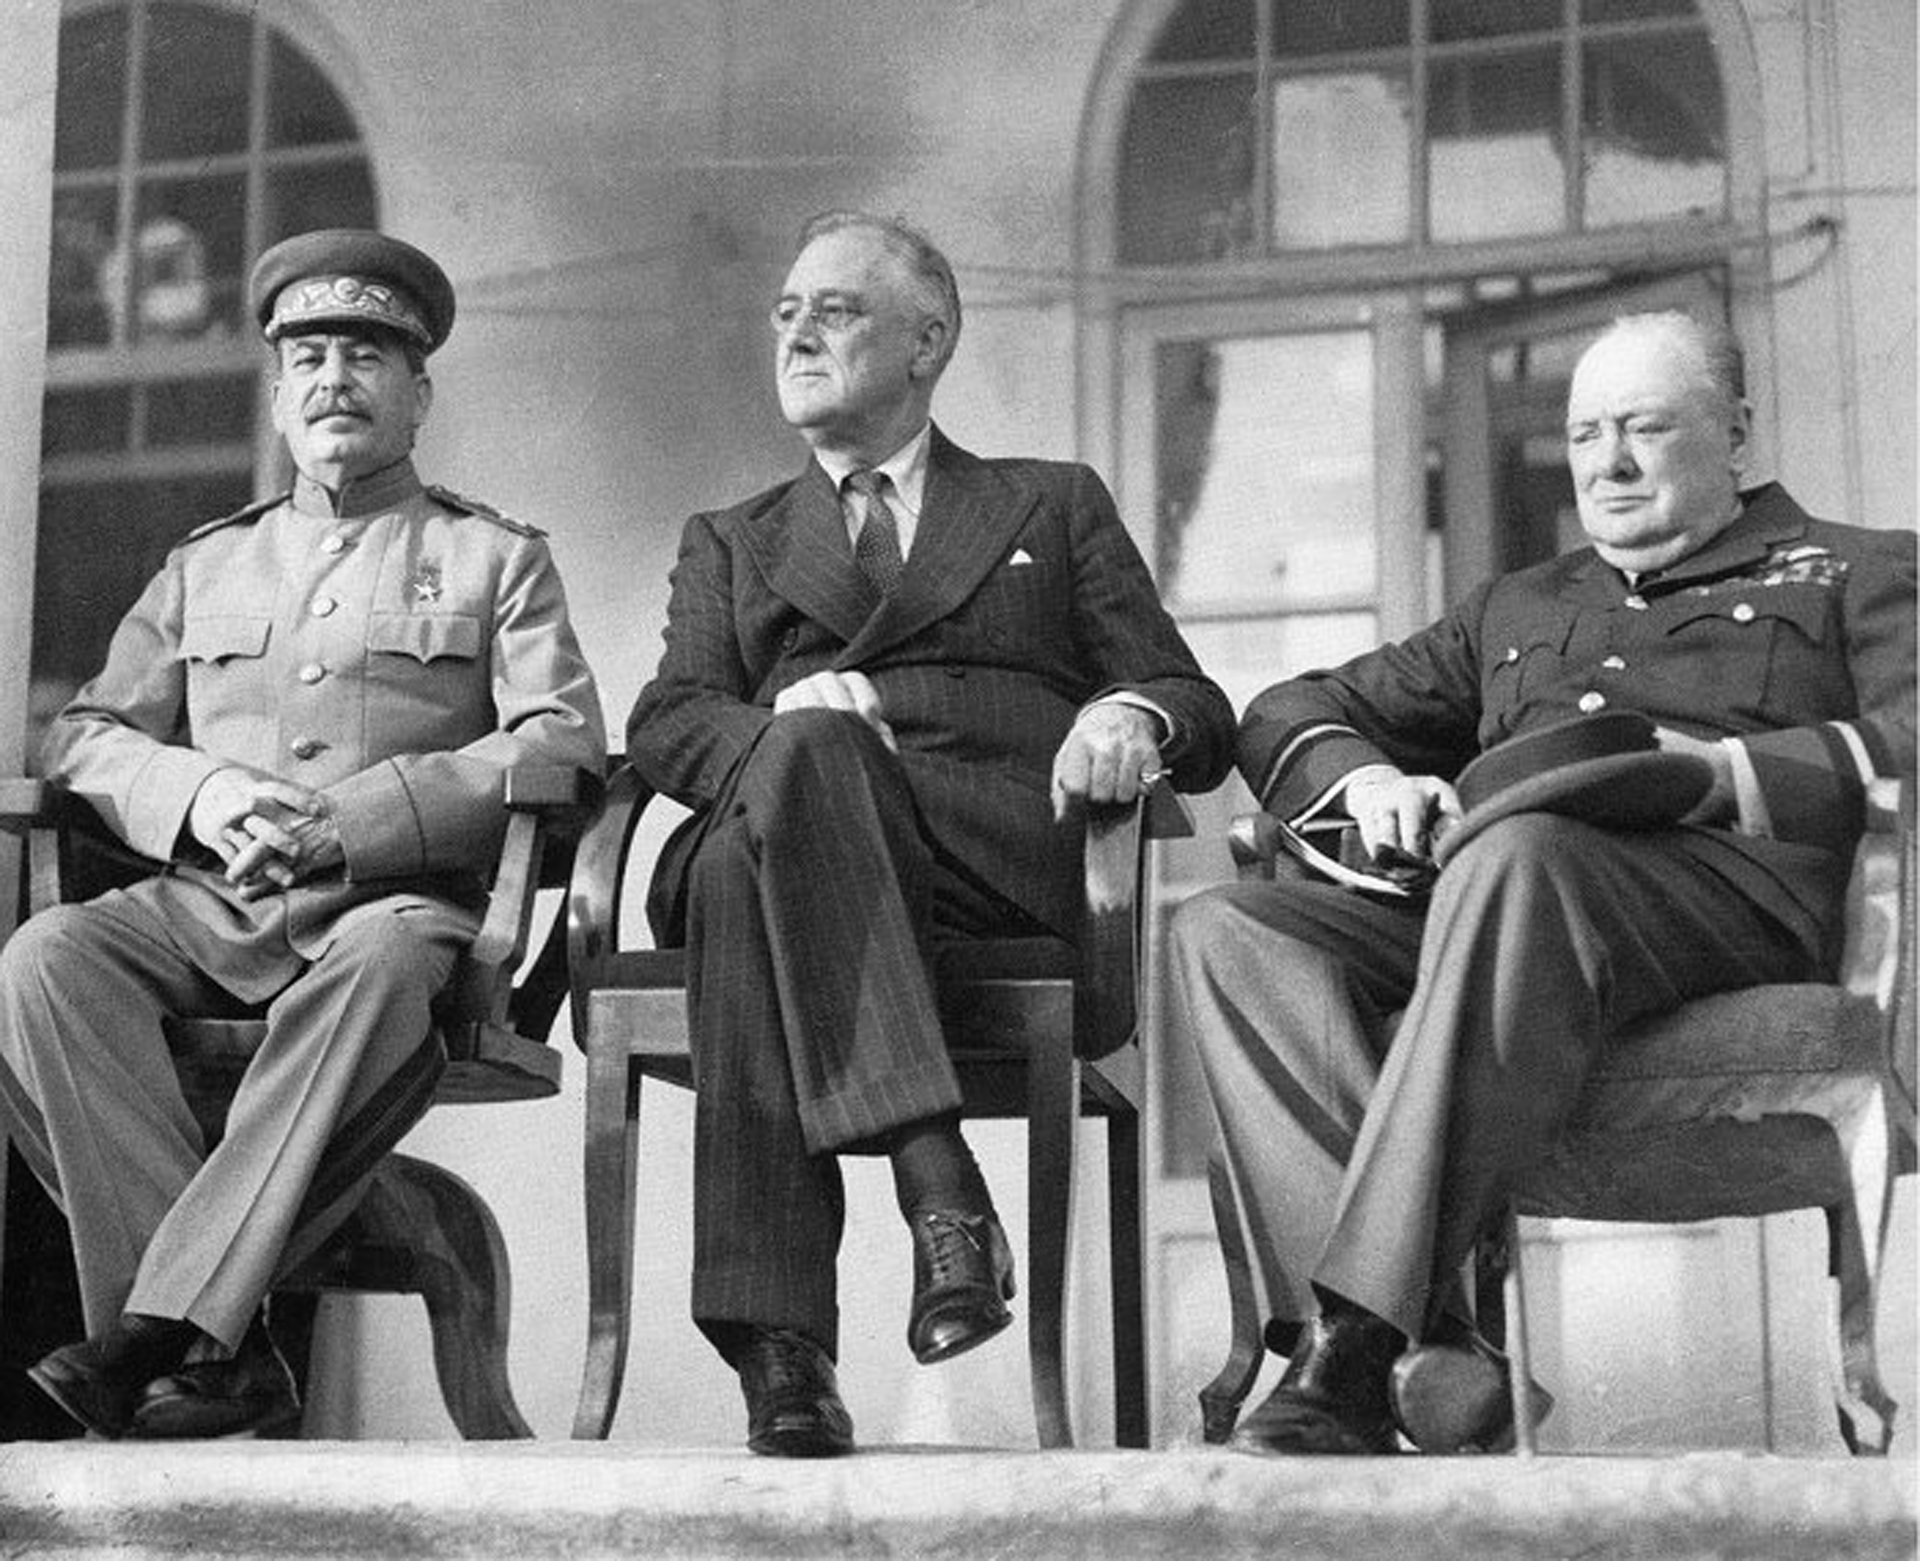 The &lsquo;Big Three&rsquo; during the Tehran Conference to discuss the European Theatre in 1943.